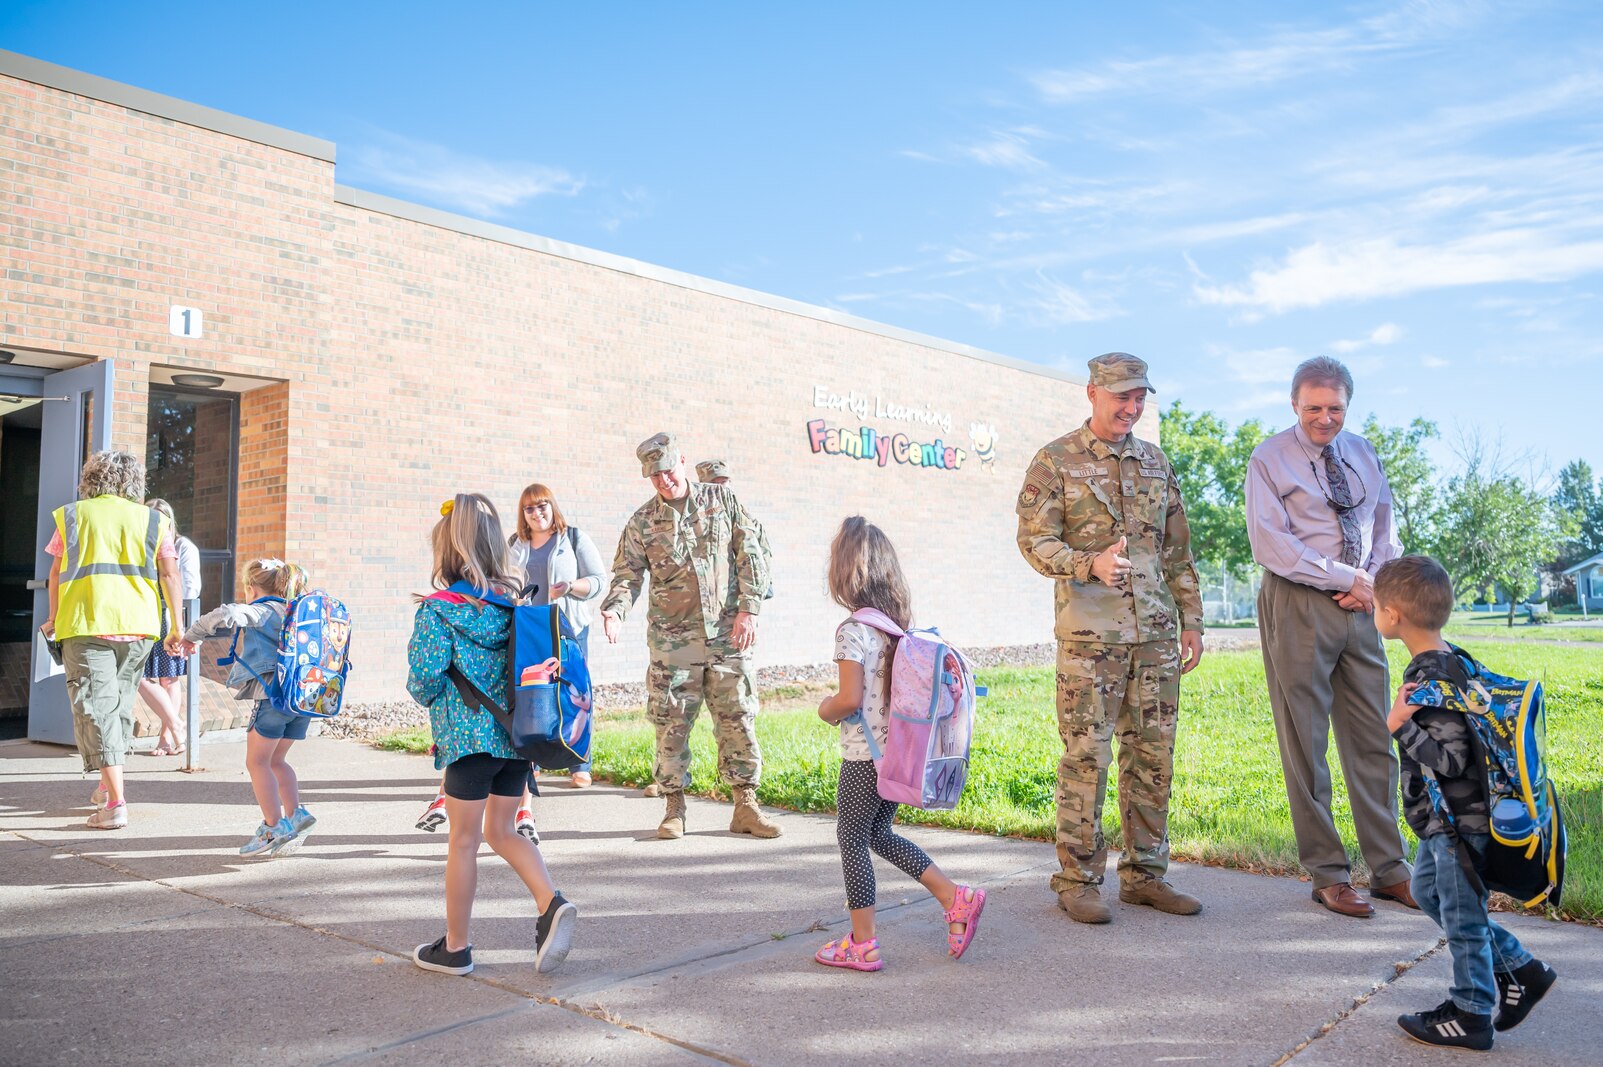 Tom Moore, Great Falls Public Schools superintendent, far right, and Col. Barry Little, 341st Missile Wing commander, right, greet students during the first day of transitional kindergarten at the GFPS Early Learning Family Center Aug. 29, 2022, in Great Falls Mont.